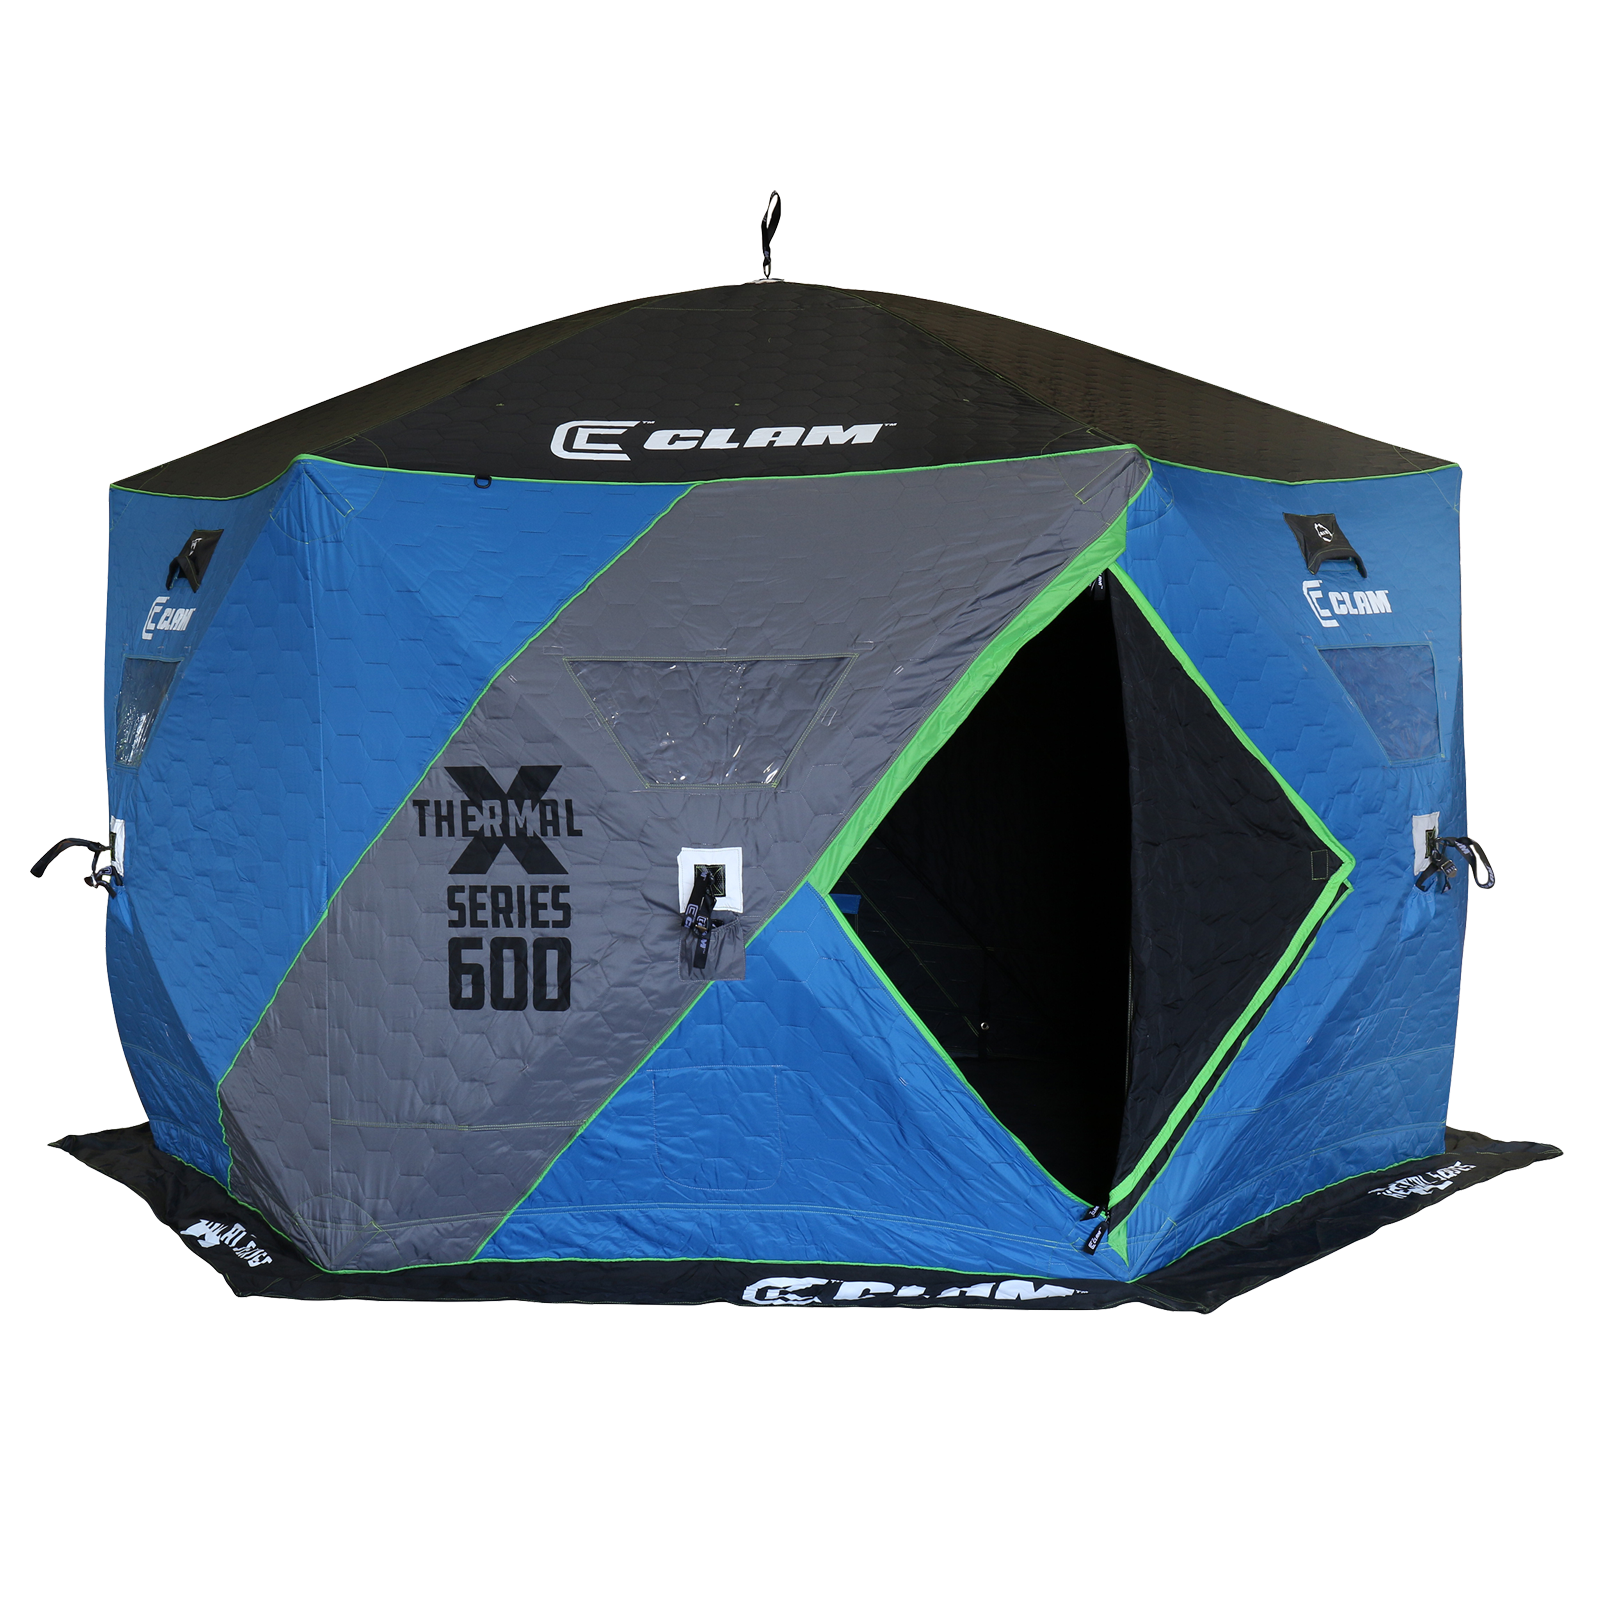 Clam X600 Thermal Pop-Up Hub Shelter